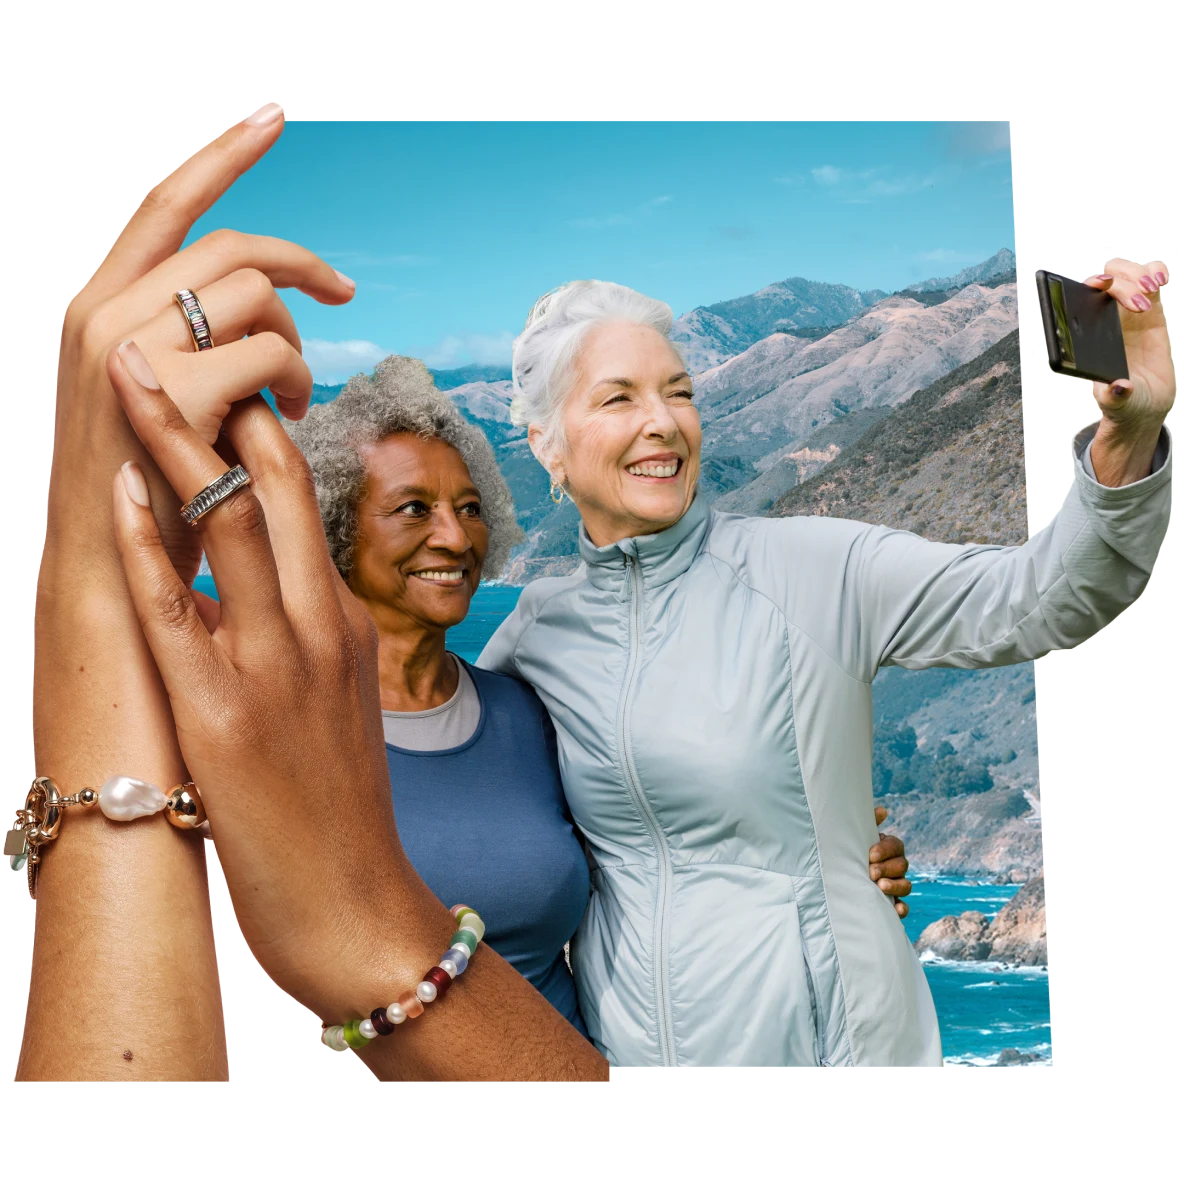 Hands with bracelets and rings slip into each other on the left. At right, elder Black and white women smile and take a selfie against a mountain and blue sky backdrop.